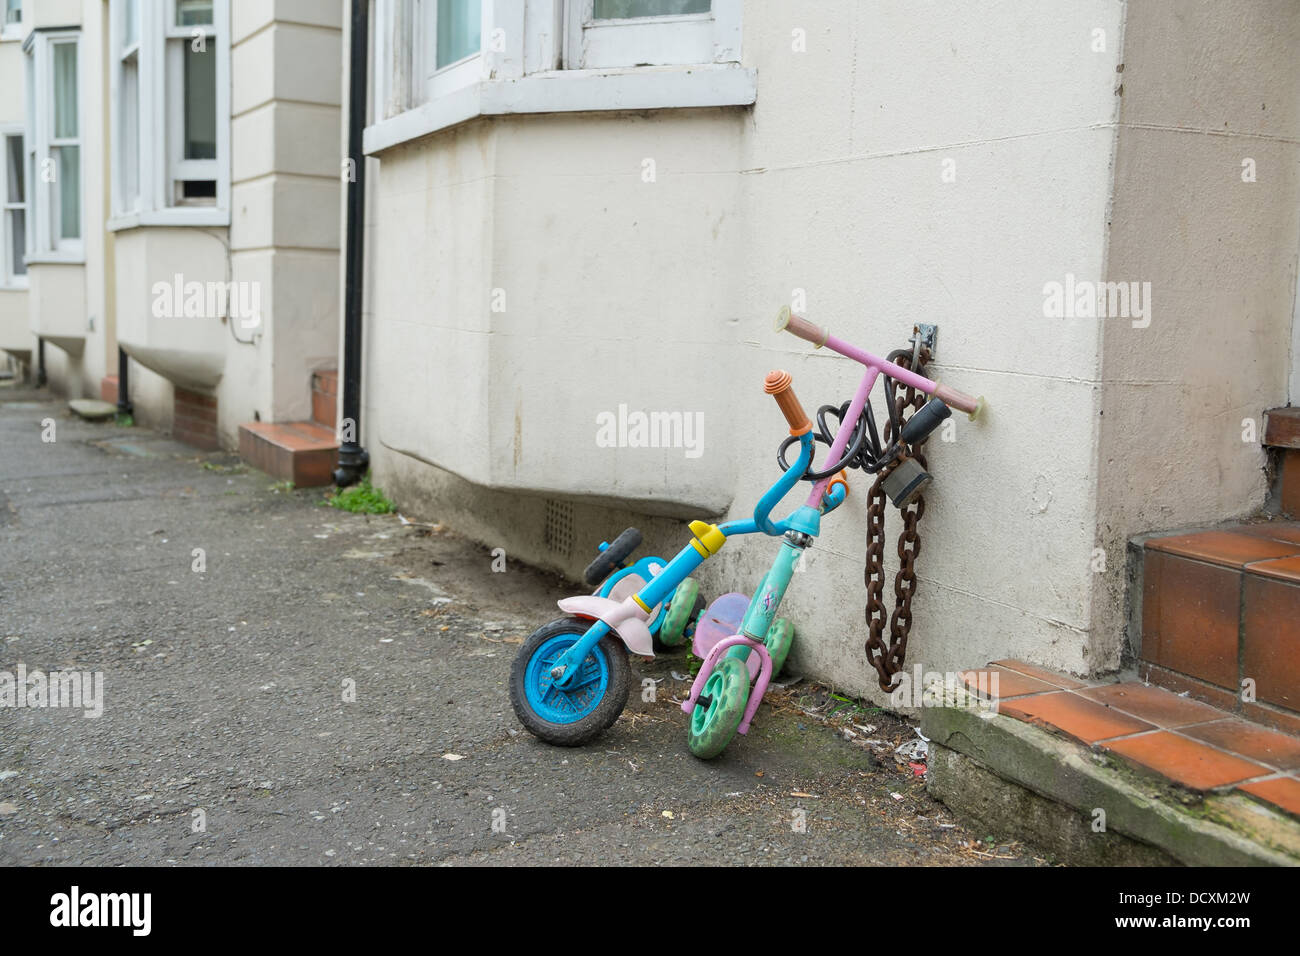 Two childrens scooters chained up in the street Stock Photo